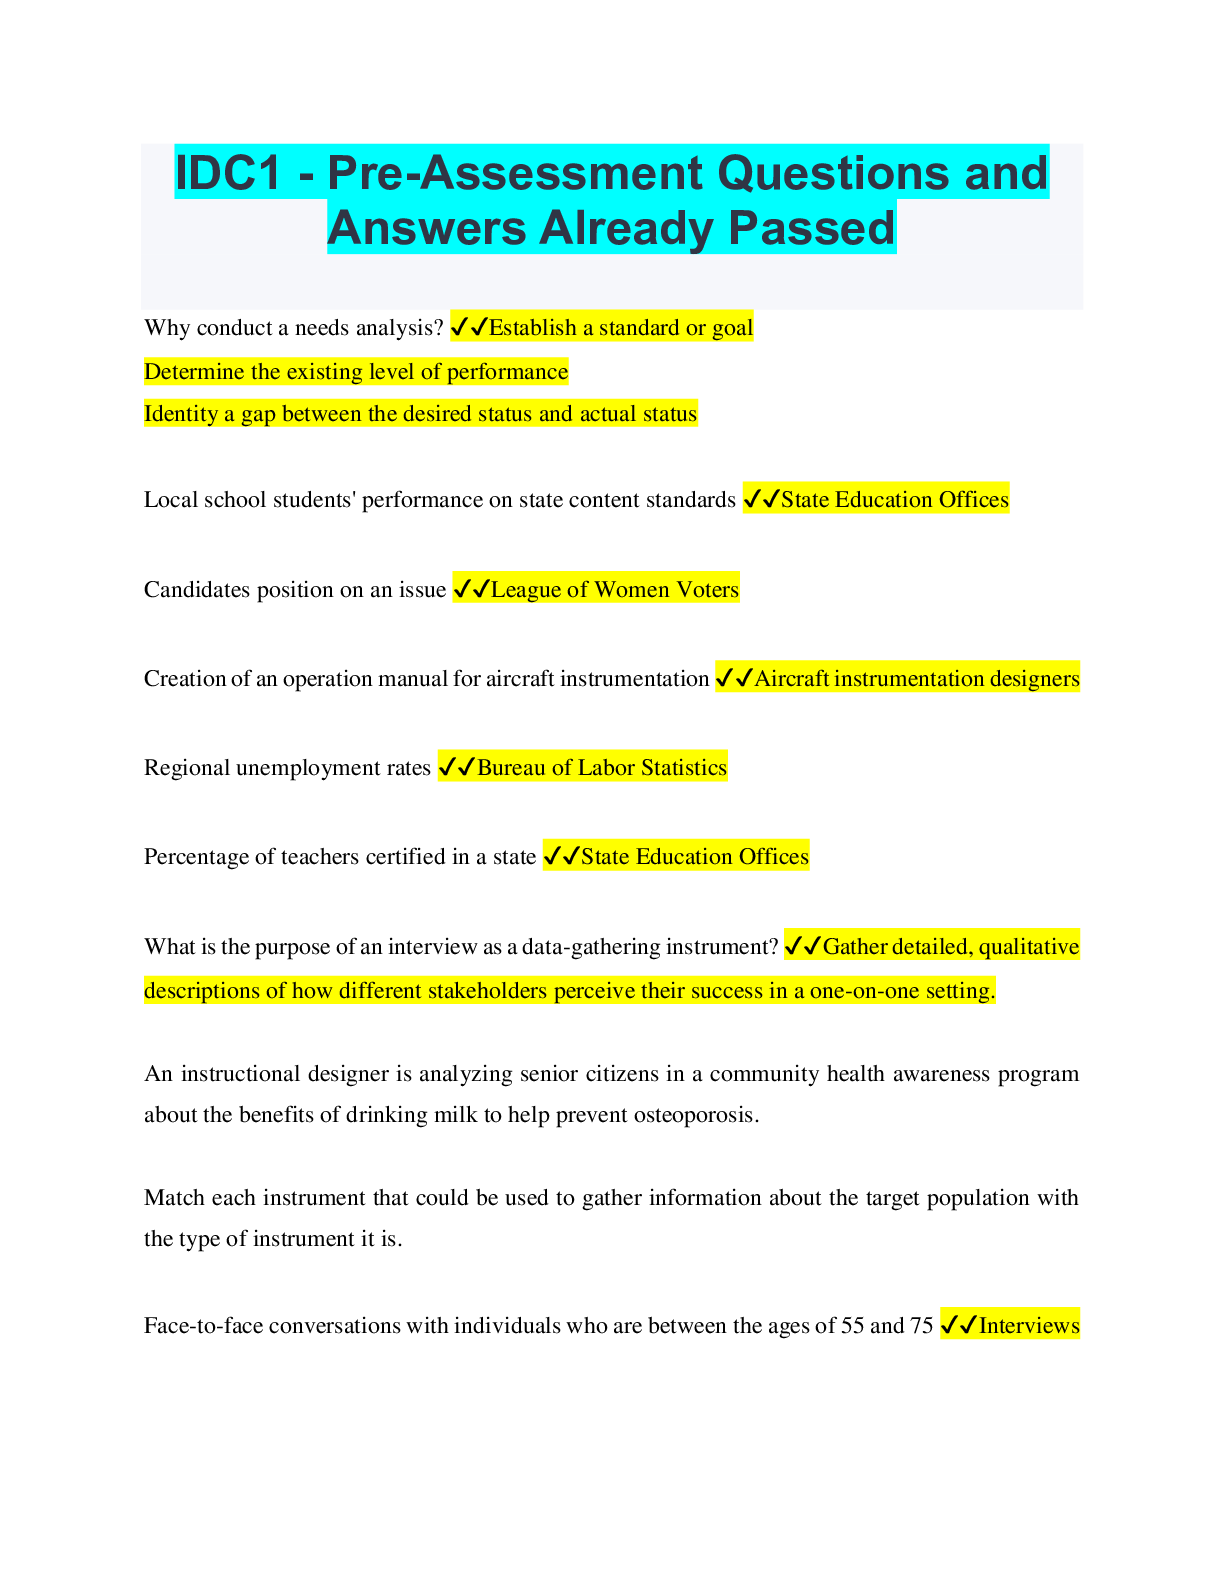 idc1-pre-assessment-questions-and-answers-already-passed-browsegrades